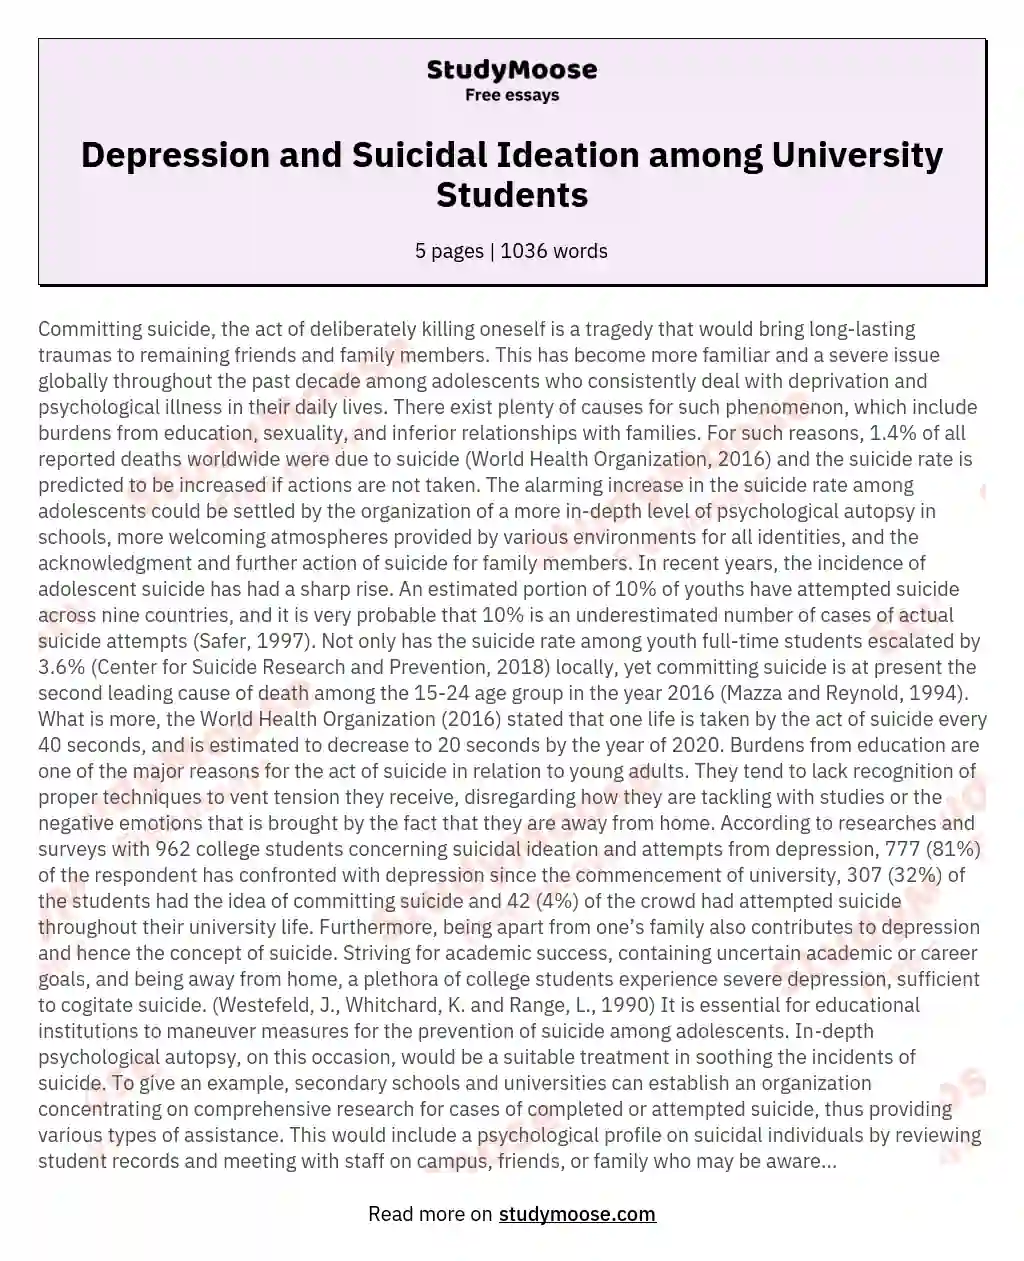 Depression and Suicidal Ideation among University Students